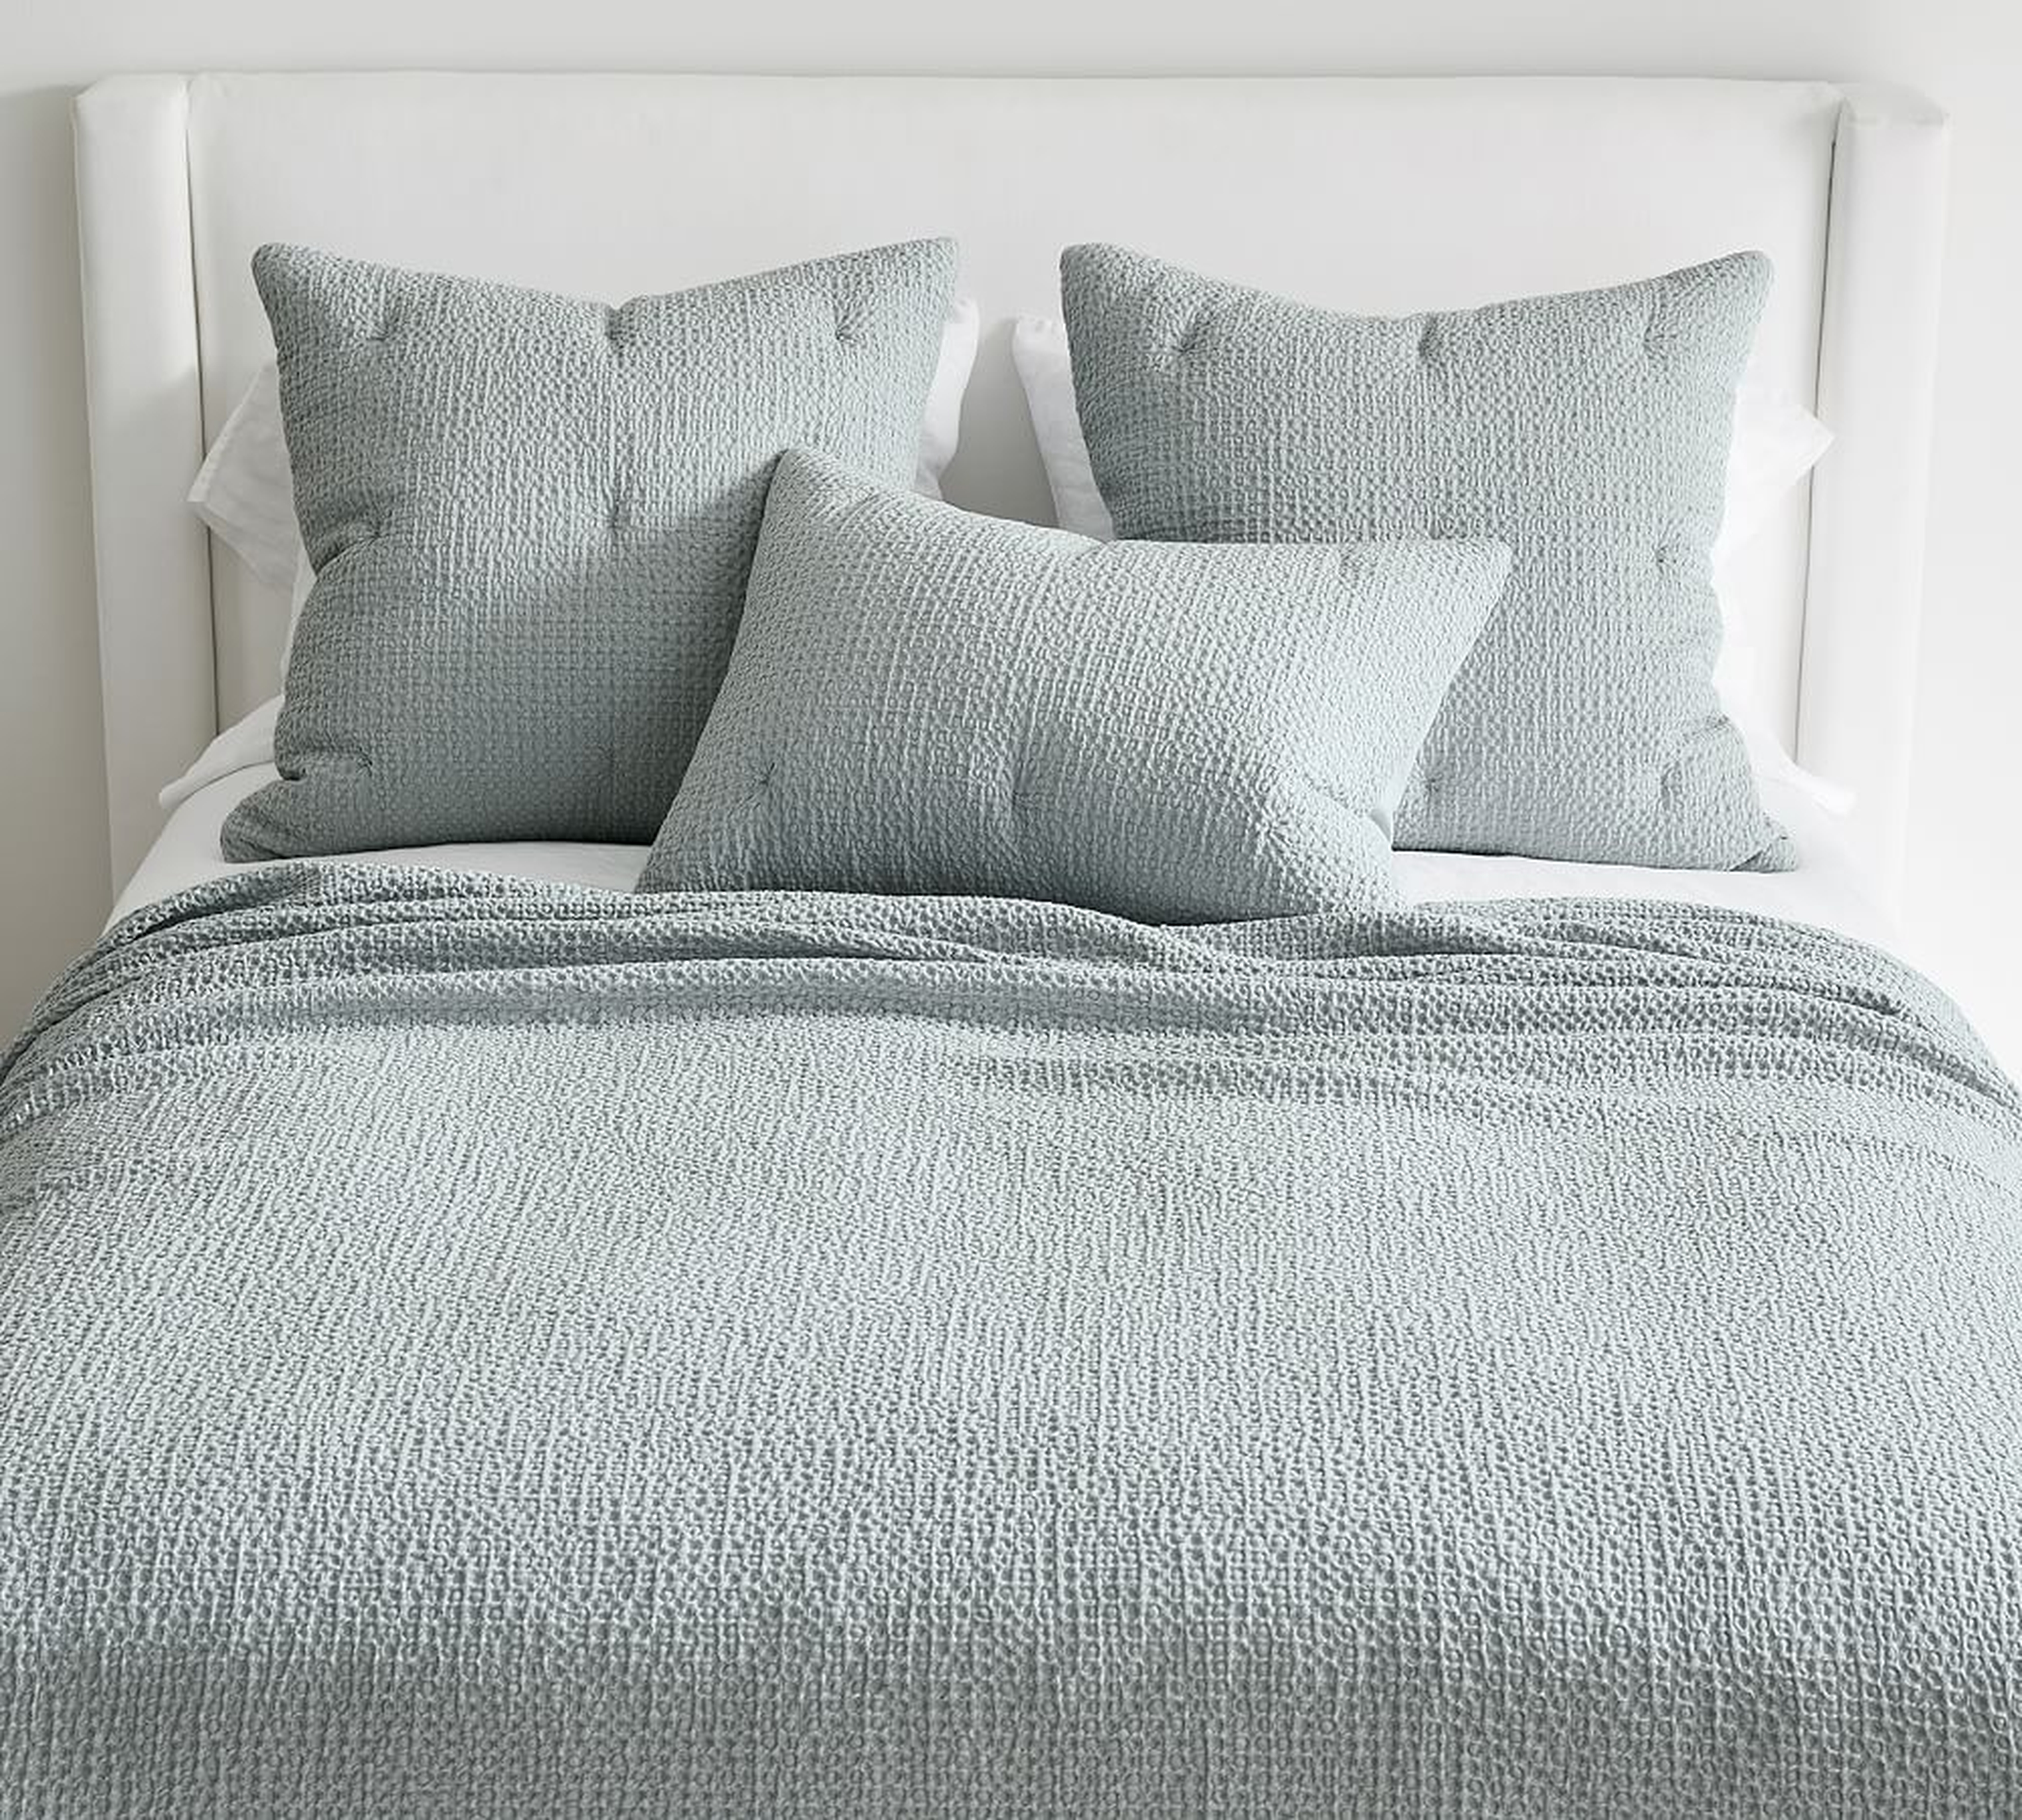 Chambray Vintage Washed Cotton/Linen Blanket, FullQueen - Pottery Barn